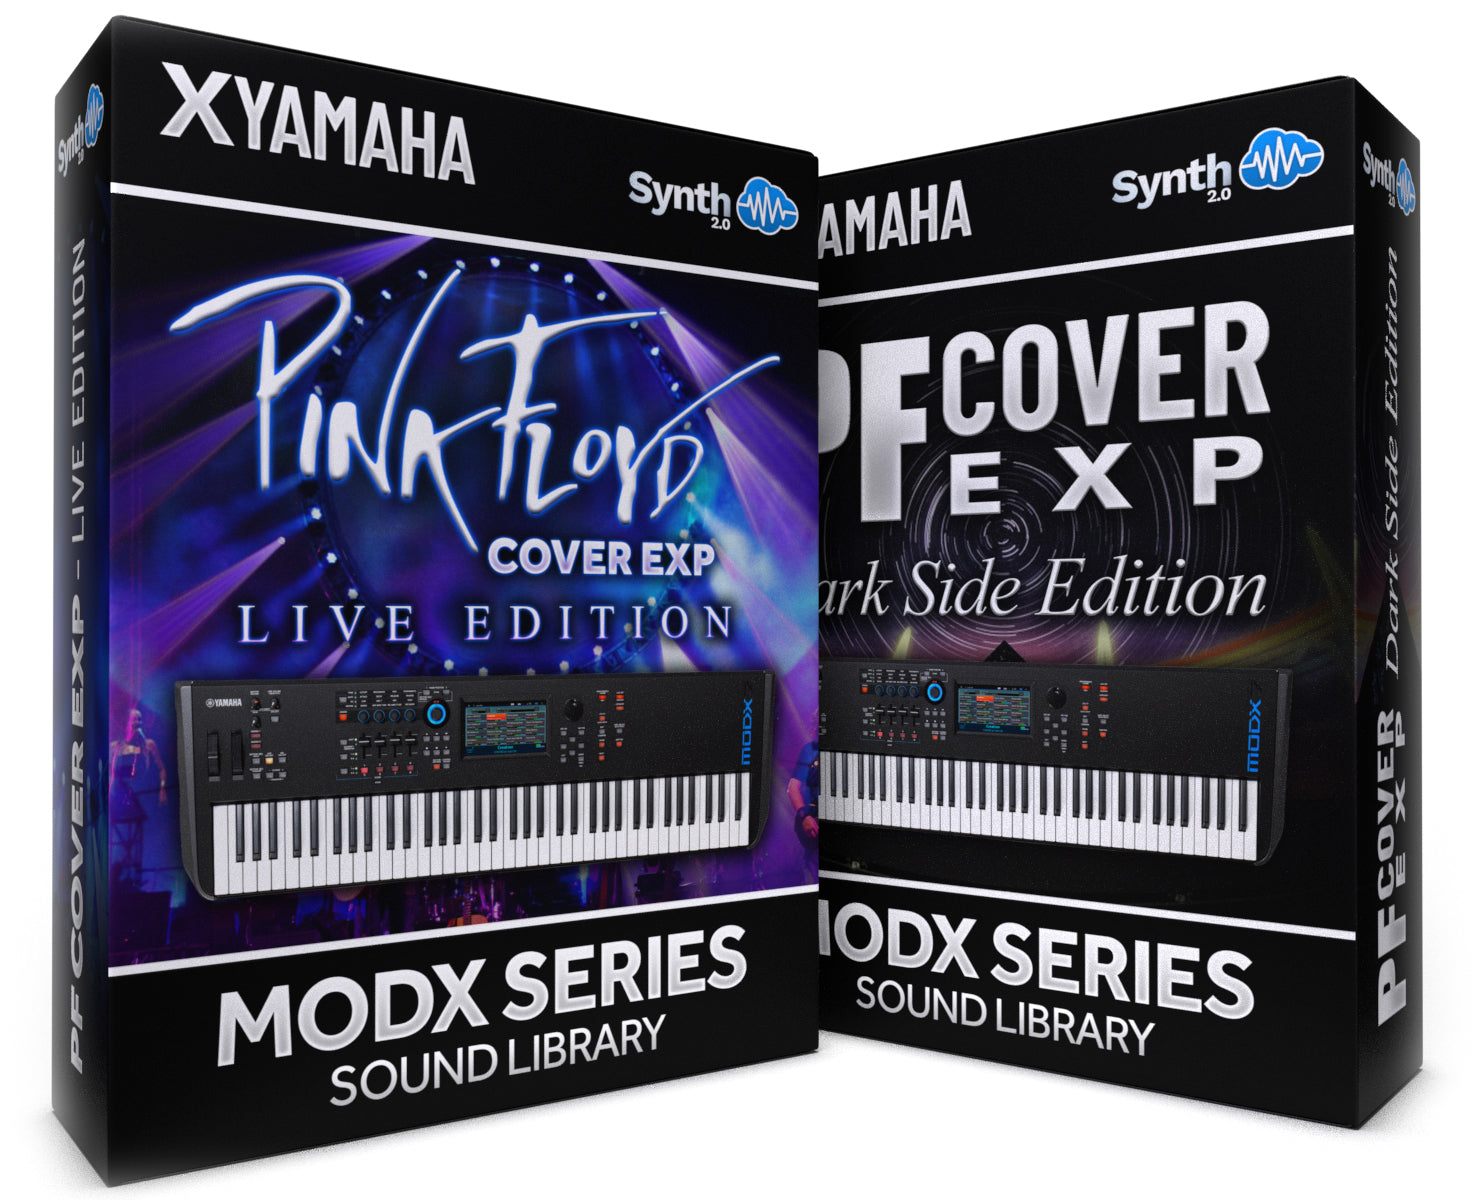 FPL052 - ( Bundle ) - PF Cover EXP Live Edition + PF Cover EXP Dark Side Edition - Yamaha MODX / +